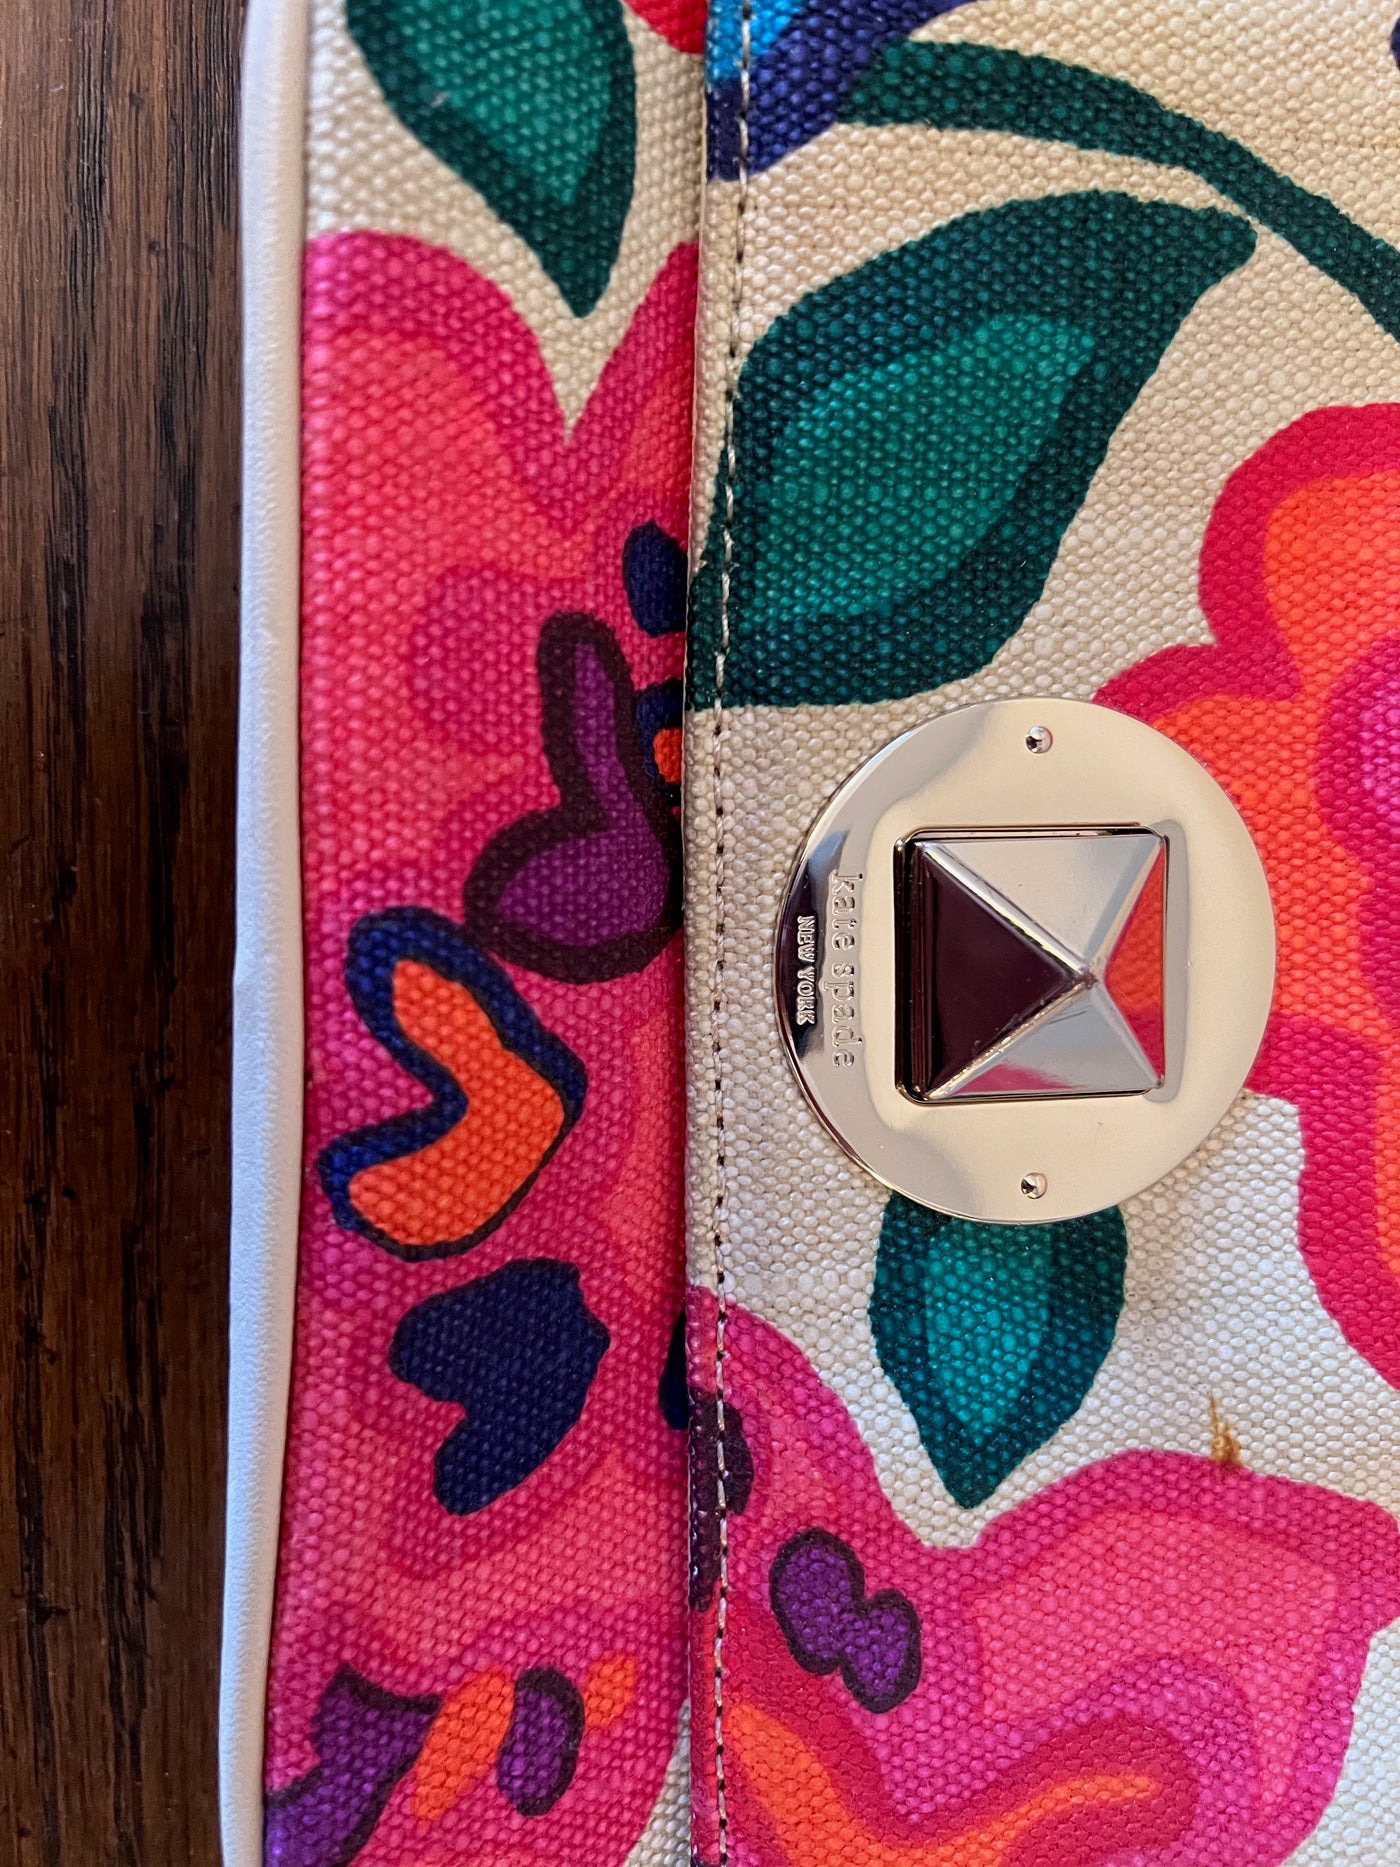 Kate Spade New York- Canvas Floral Crossbody Bag – Sell My Stuff Canada -  Canada's Content and Estate Sale Specialists